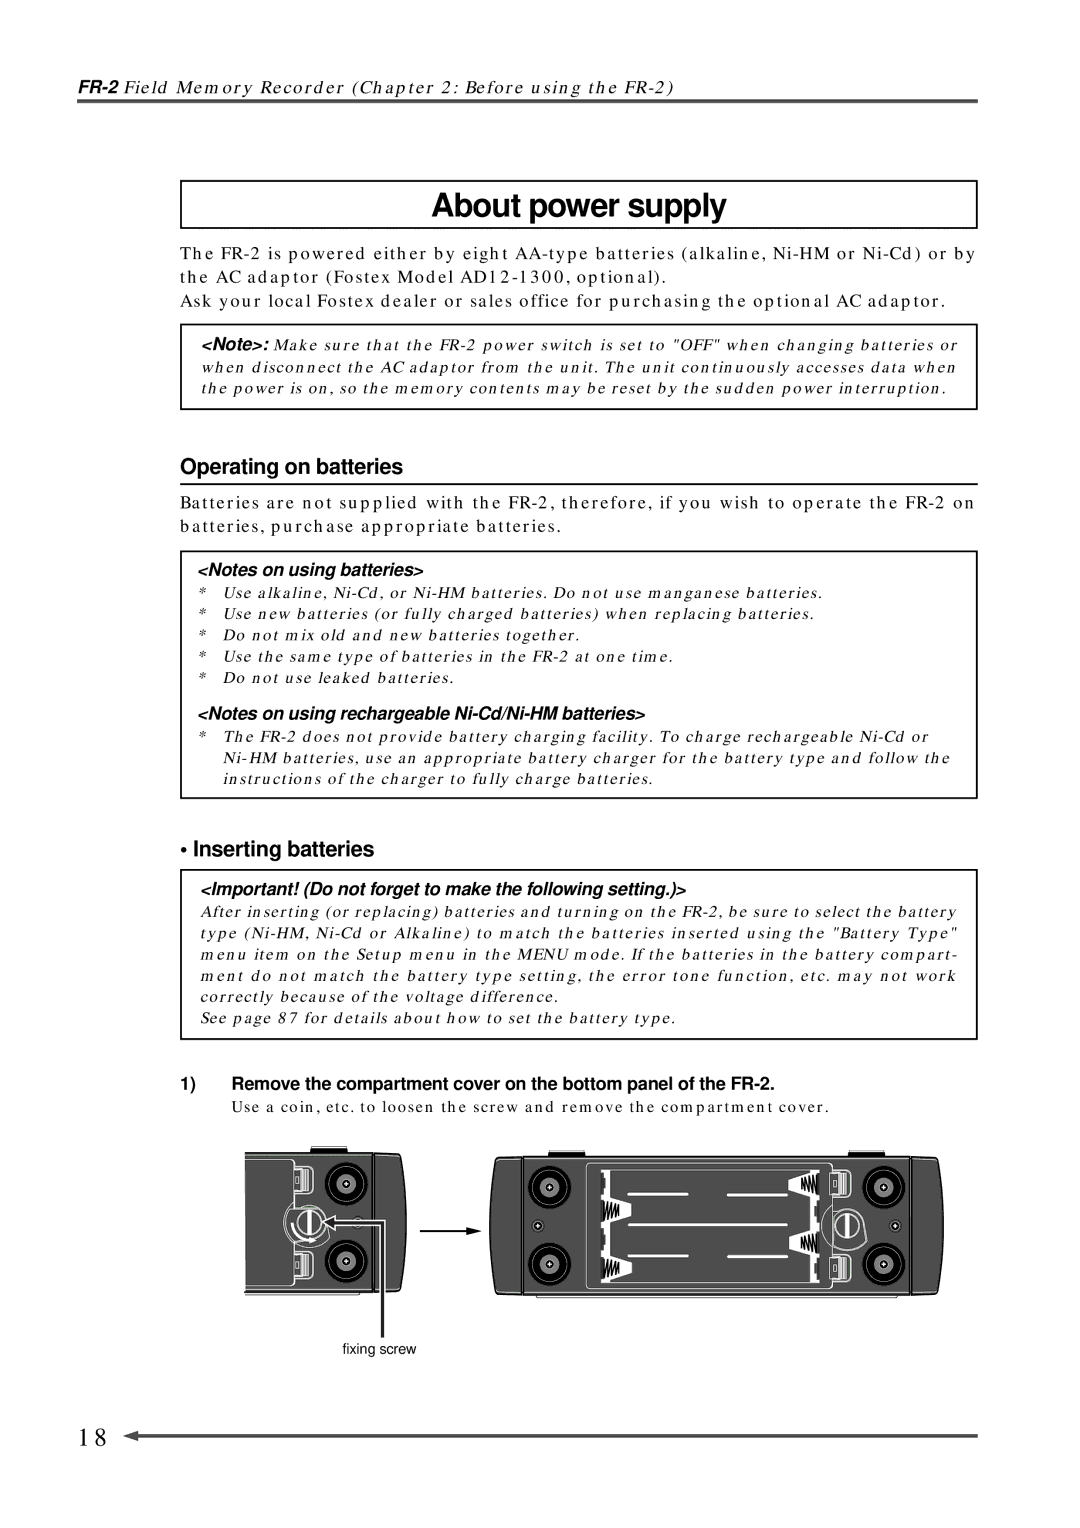 Fostex FR-2 owner manual About power supply, Operating on batteries, Inserting batteries 